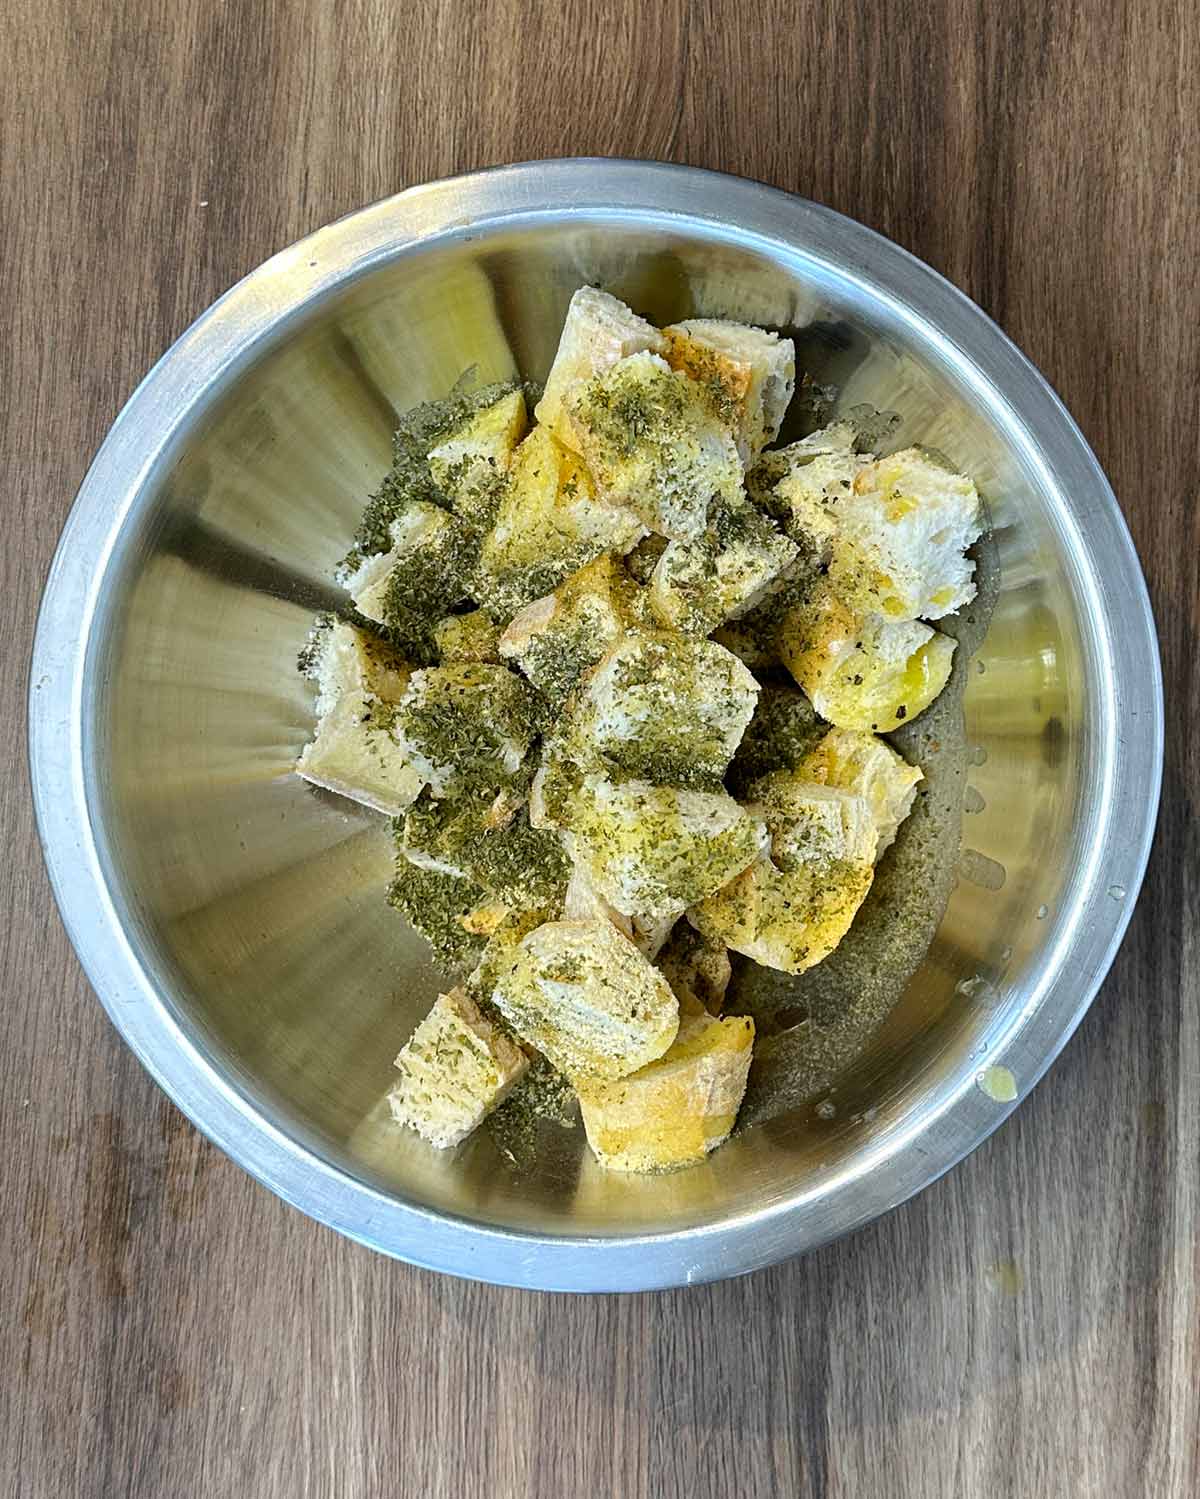 Cubes of bread in a bowl with melted butter and seasoning.